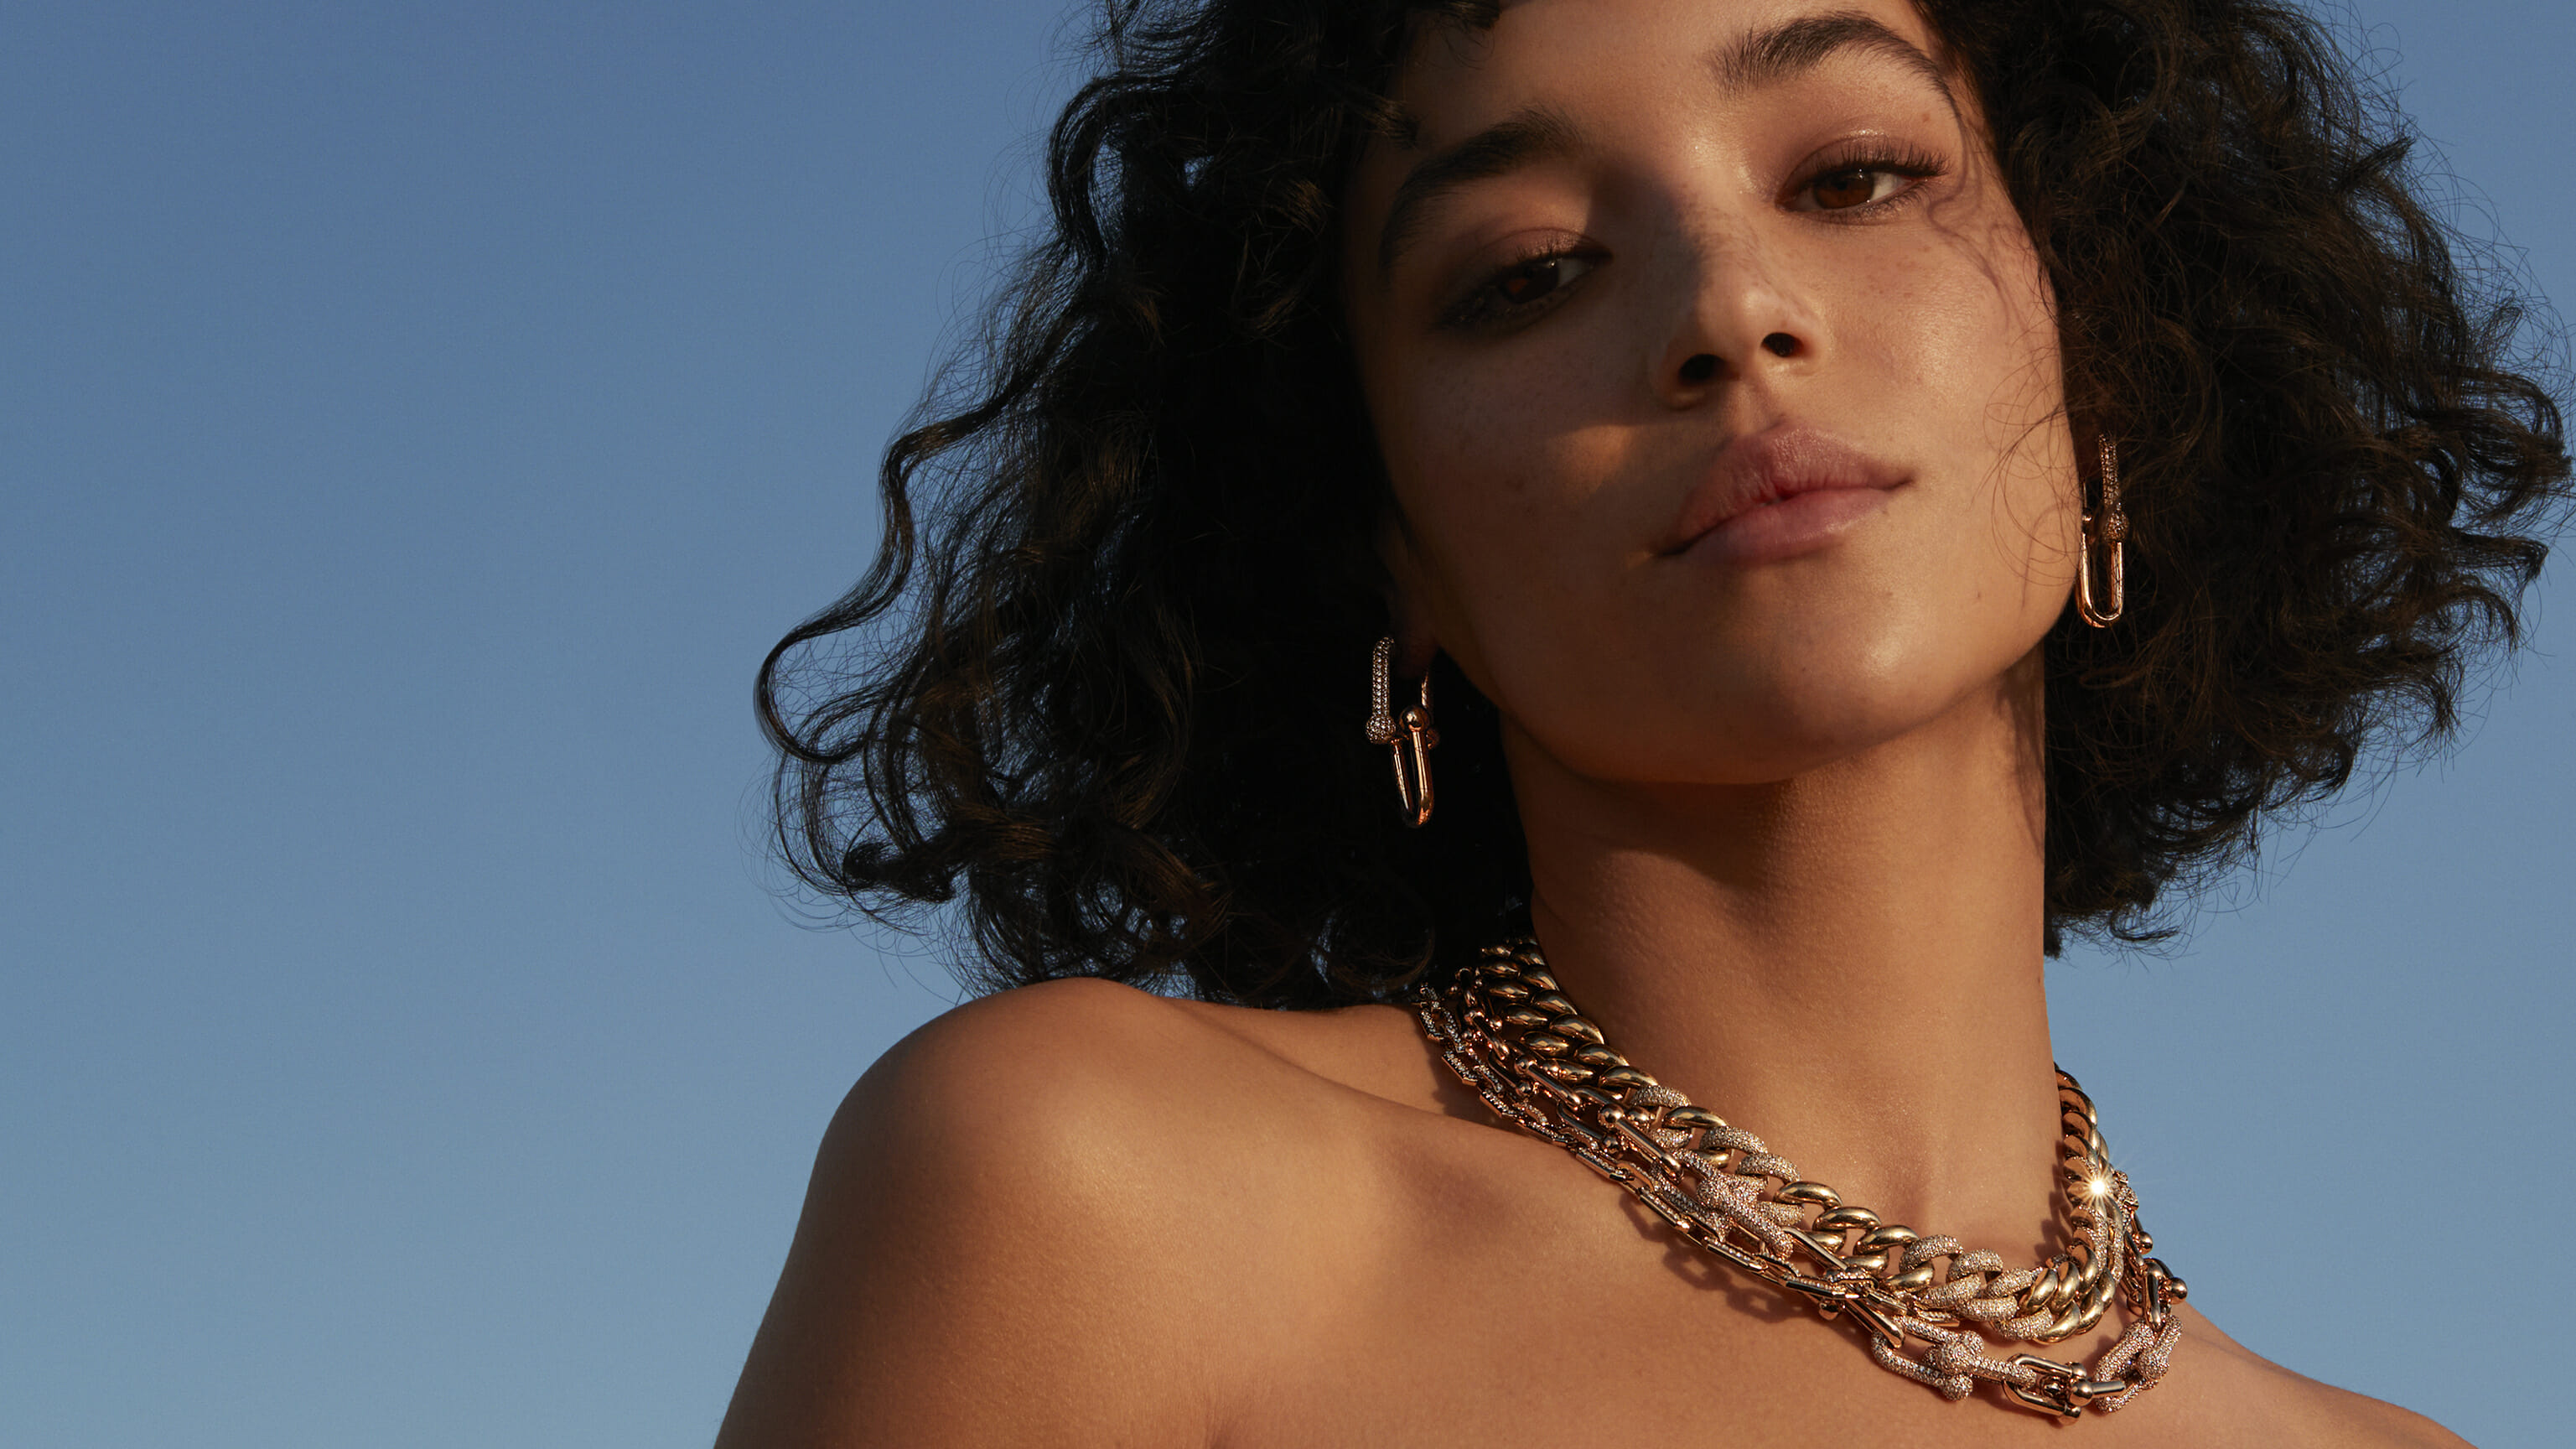 Chunky Chain Necklaces Trend Report